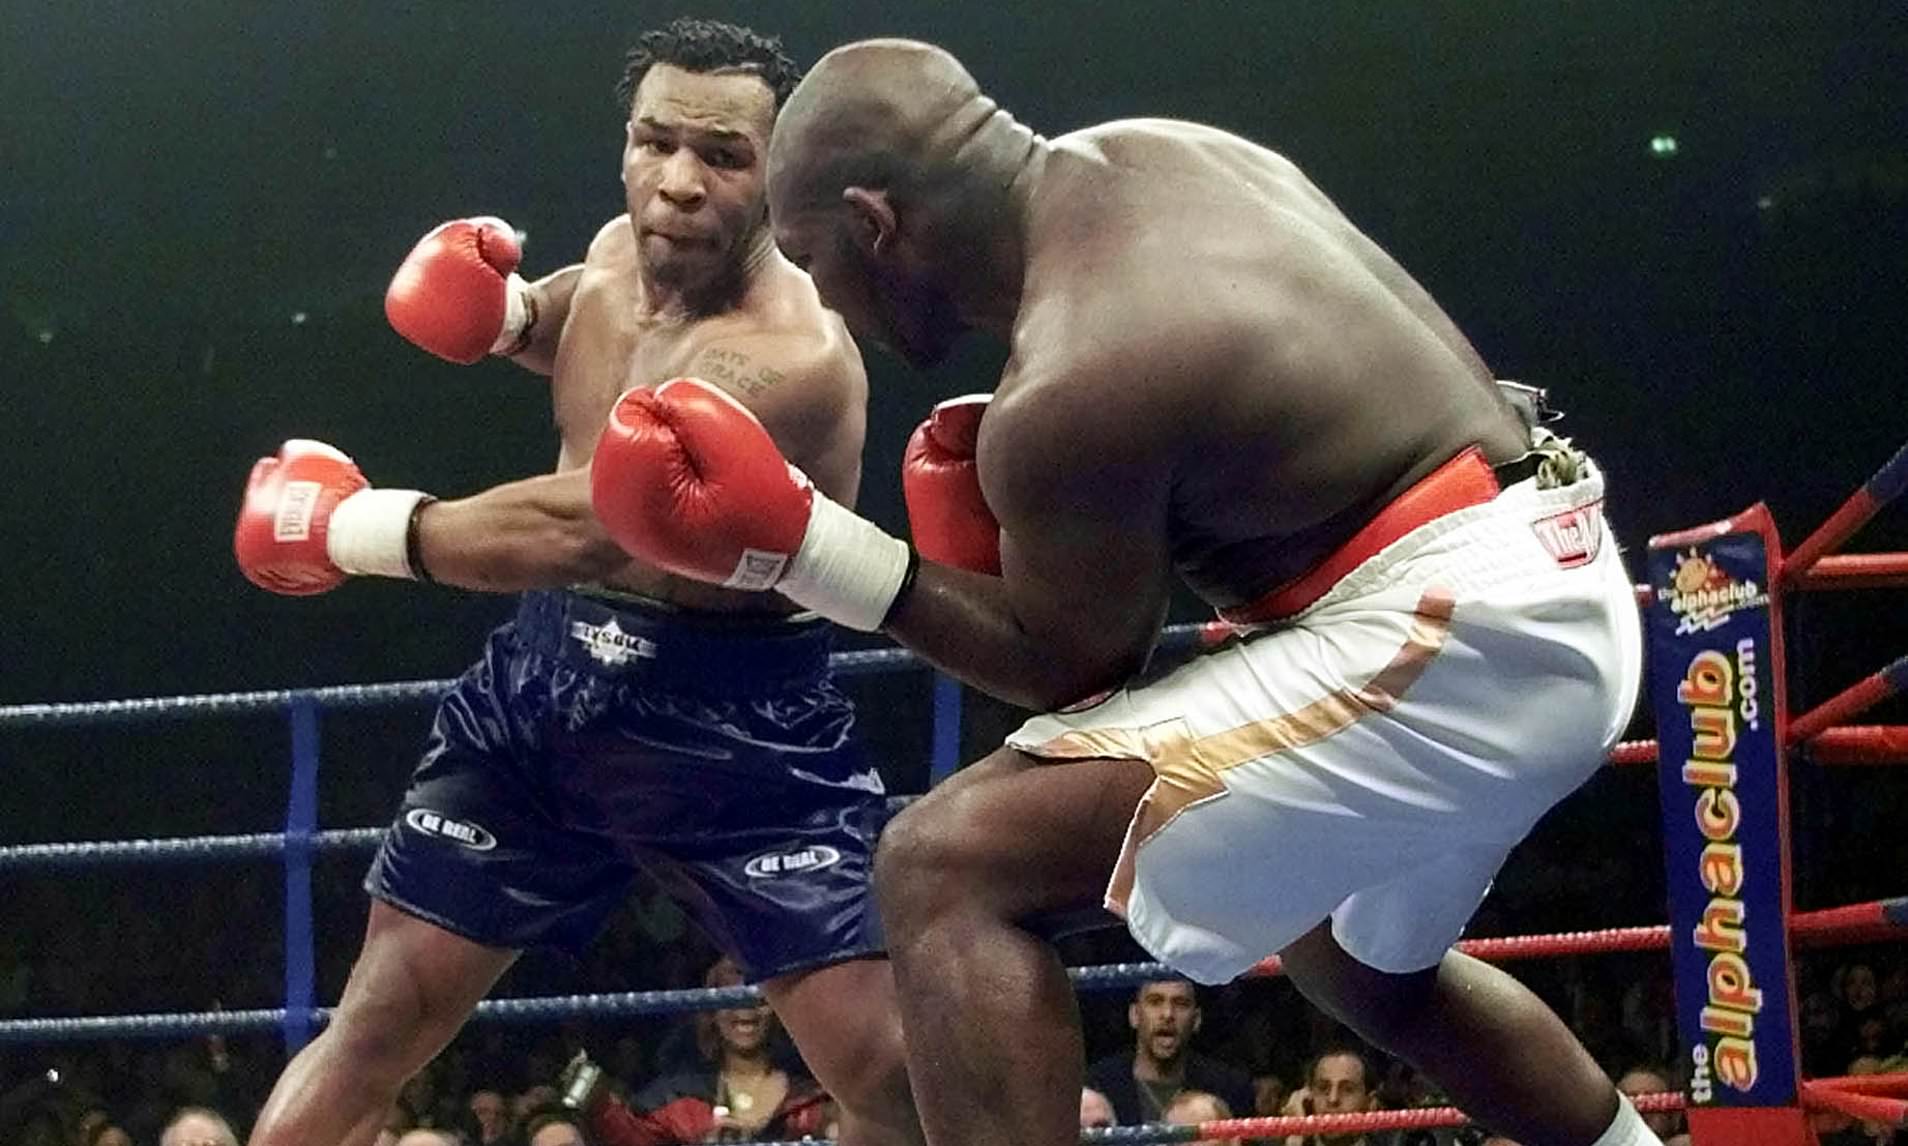 On this day… January 29… Visiting greats beat Francis and Yarde in the UK